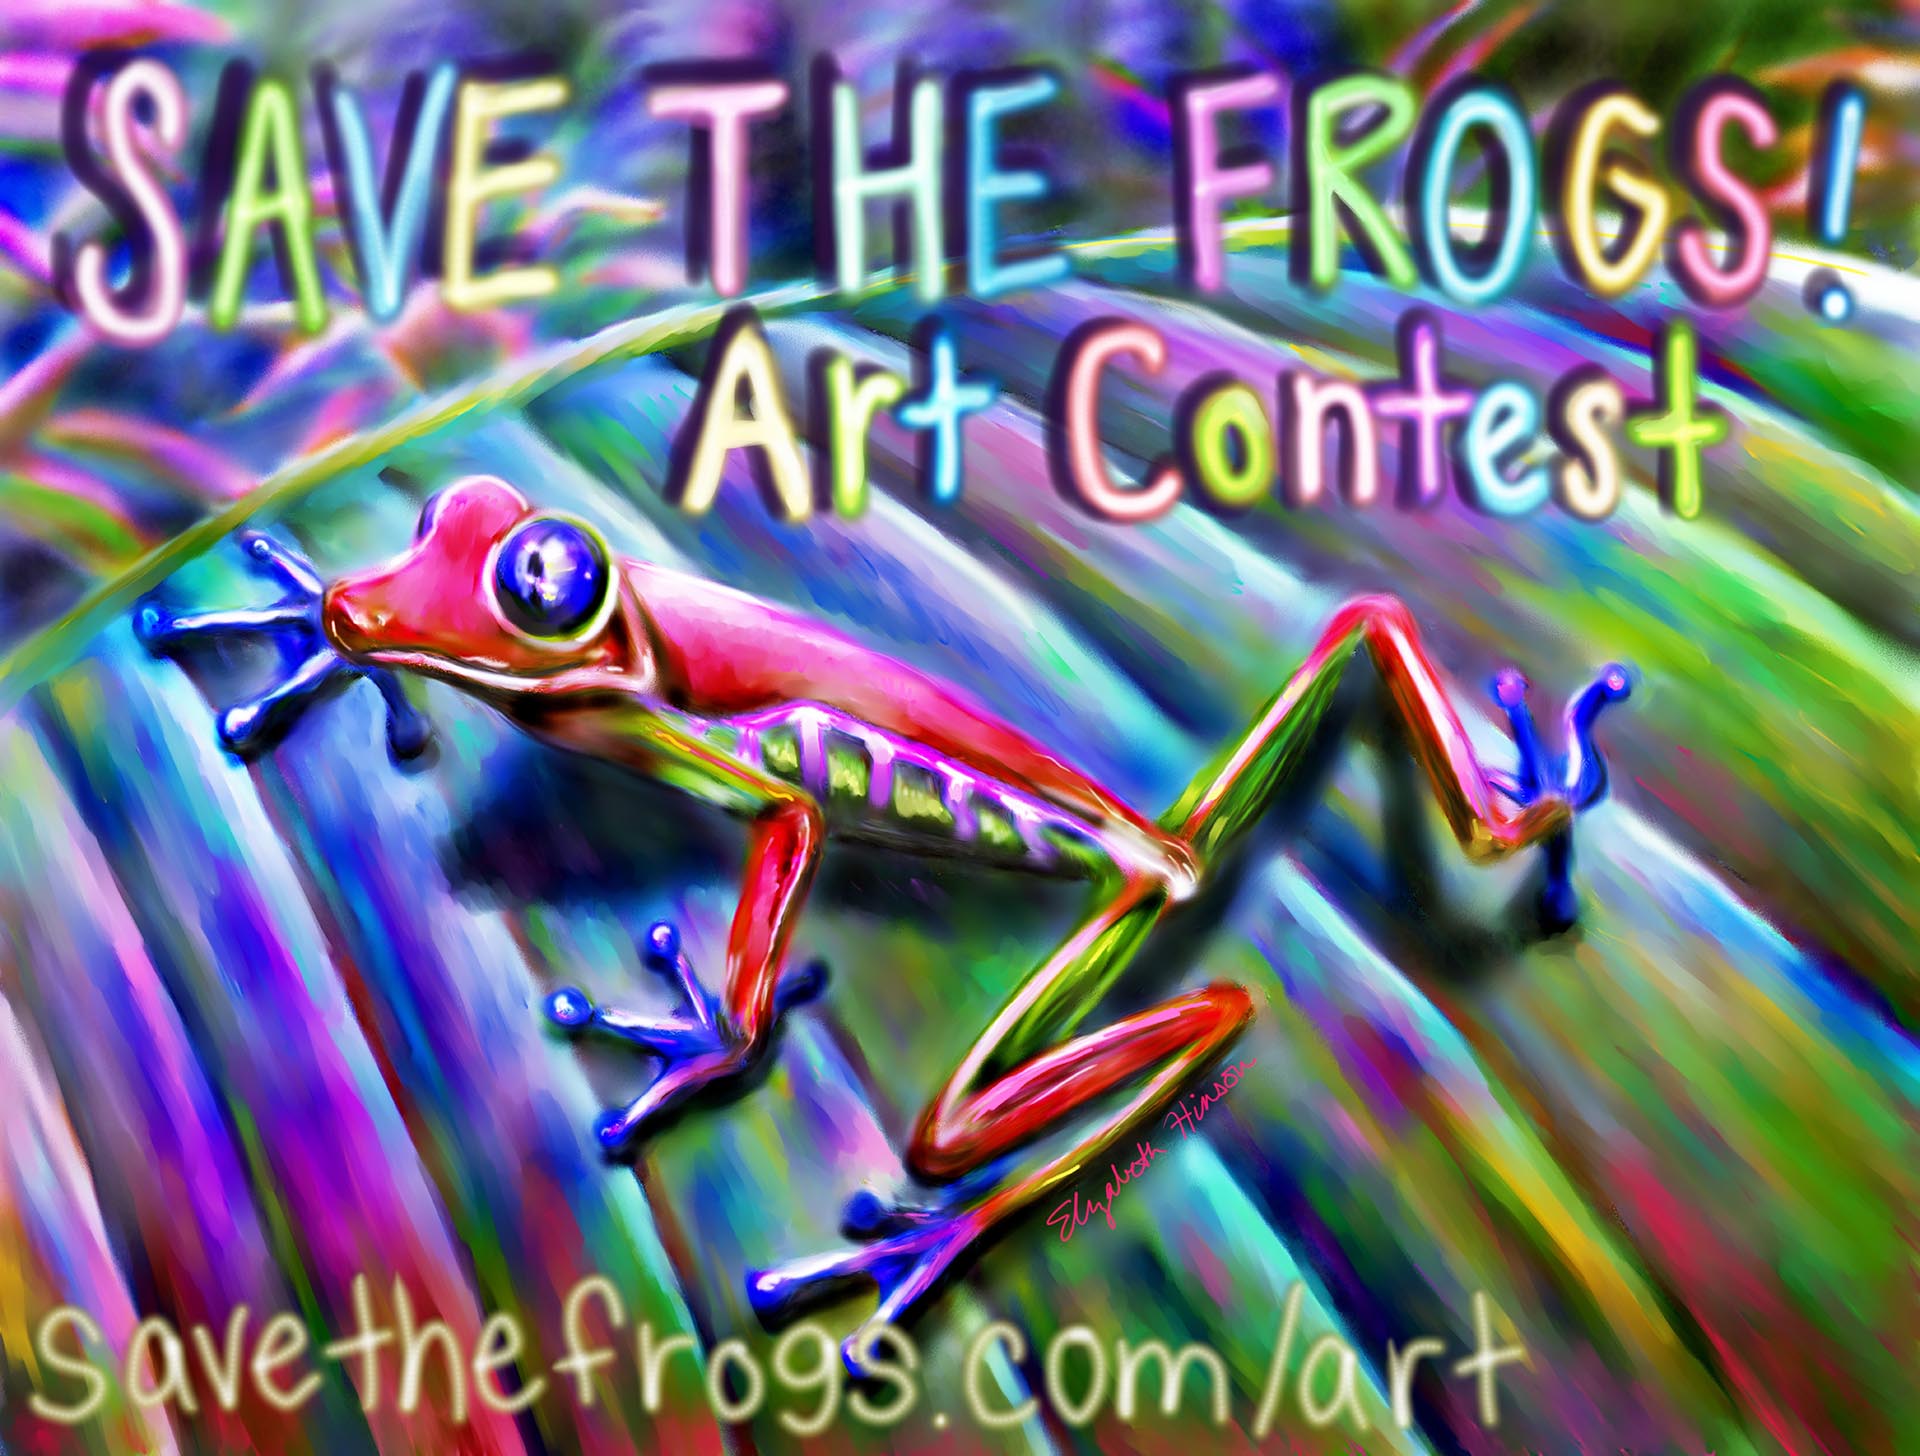 Art Contest - SAVE THE FROGS!